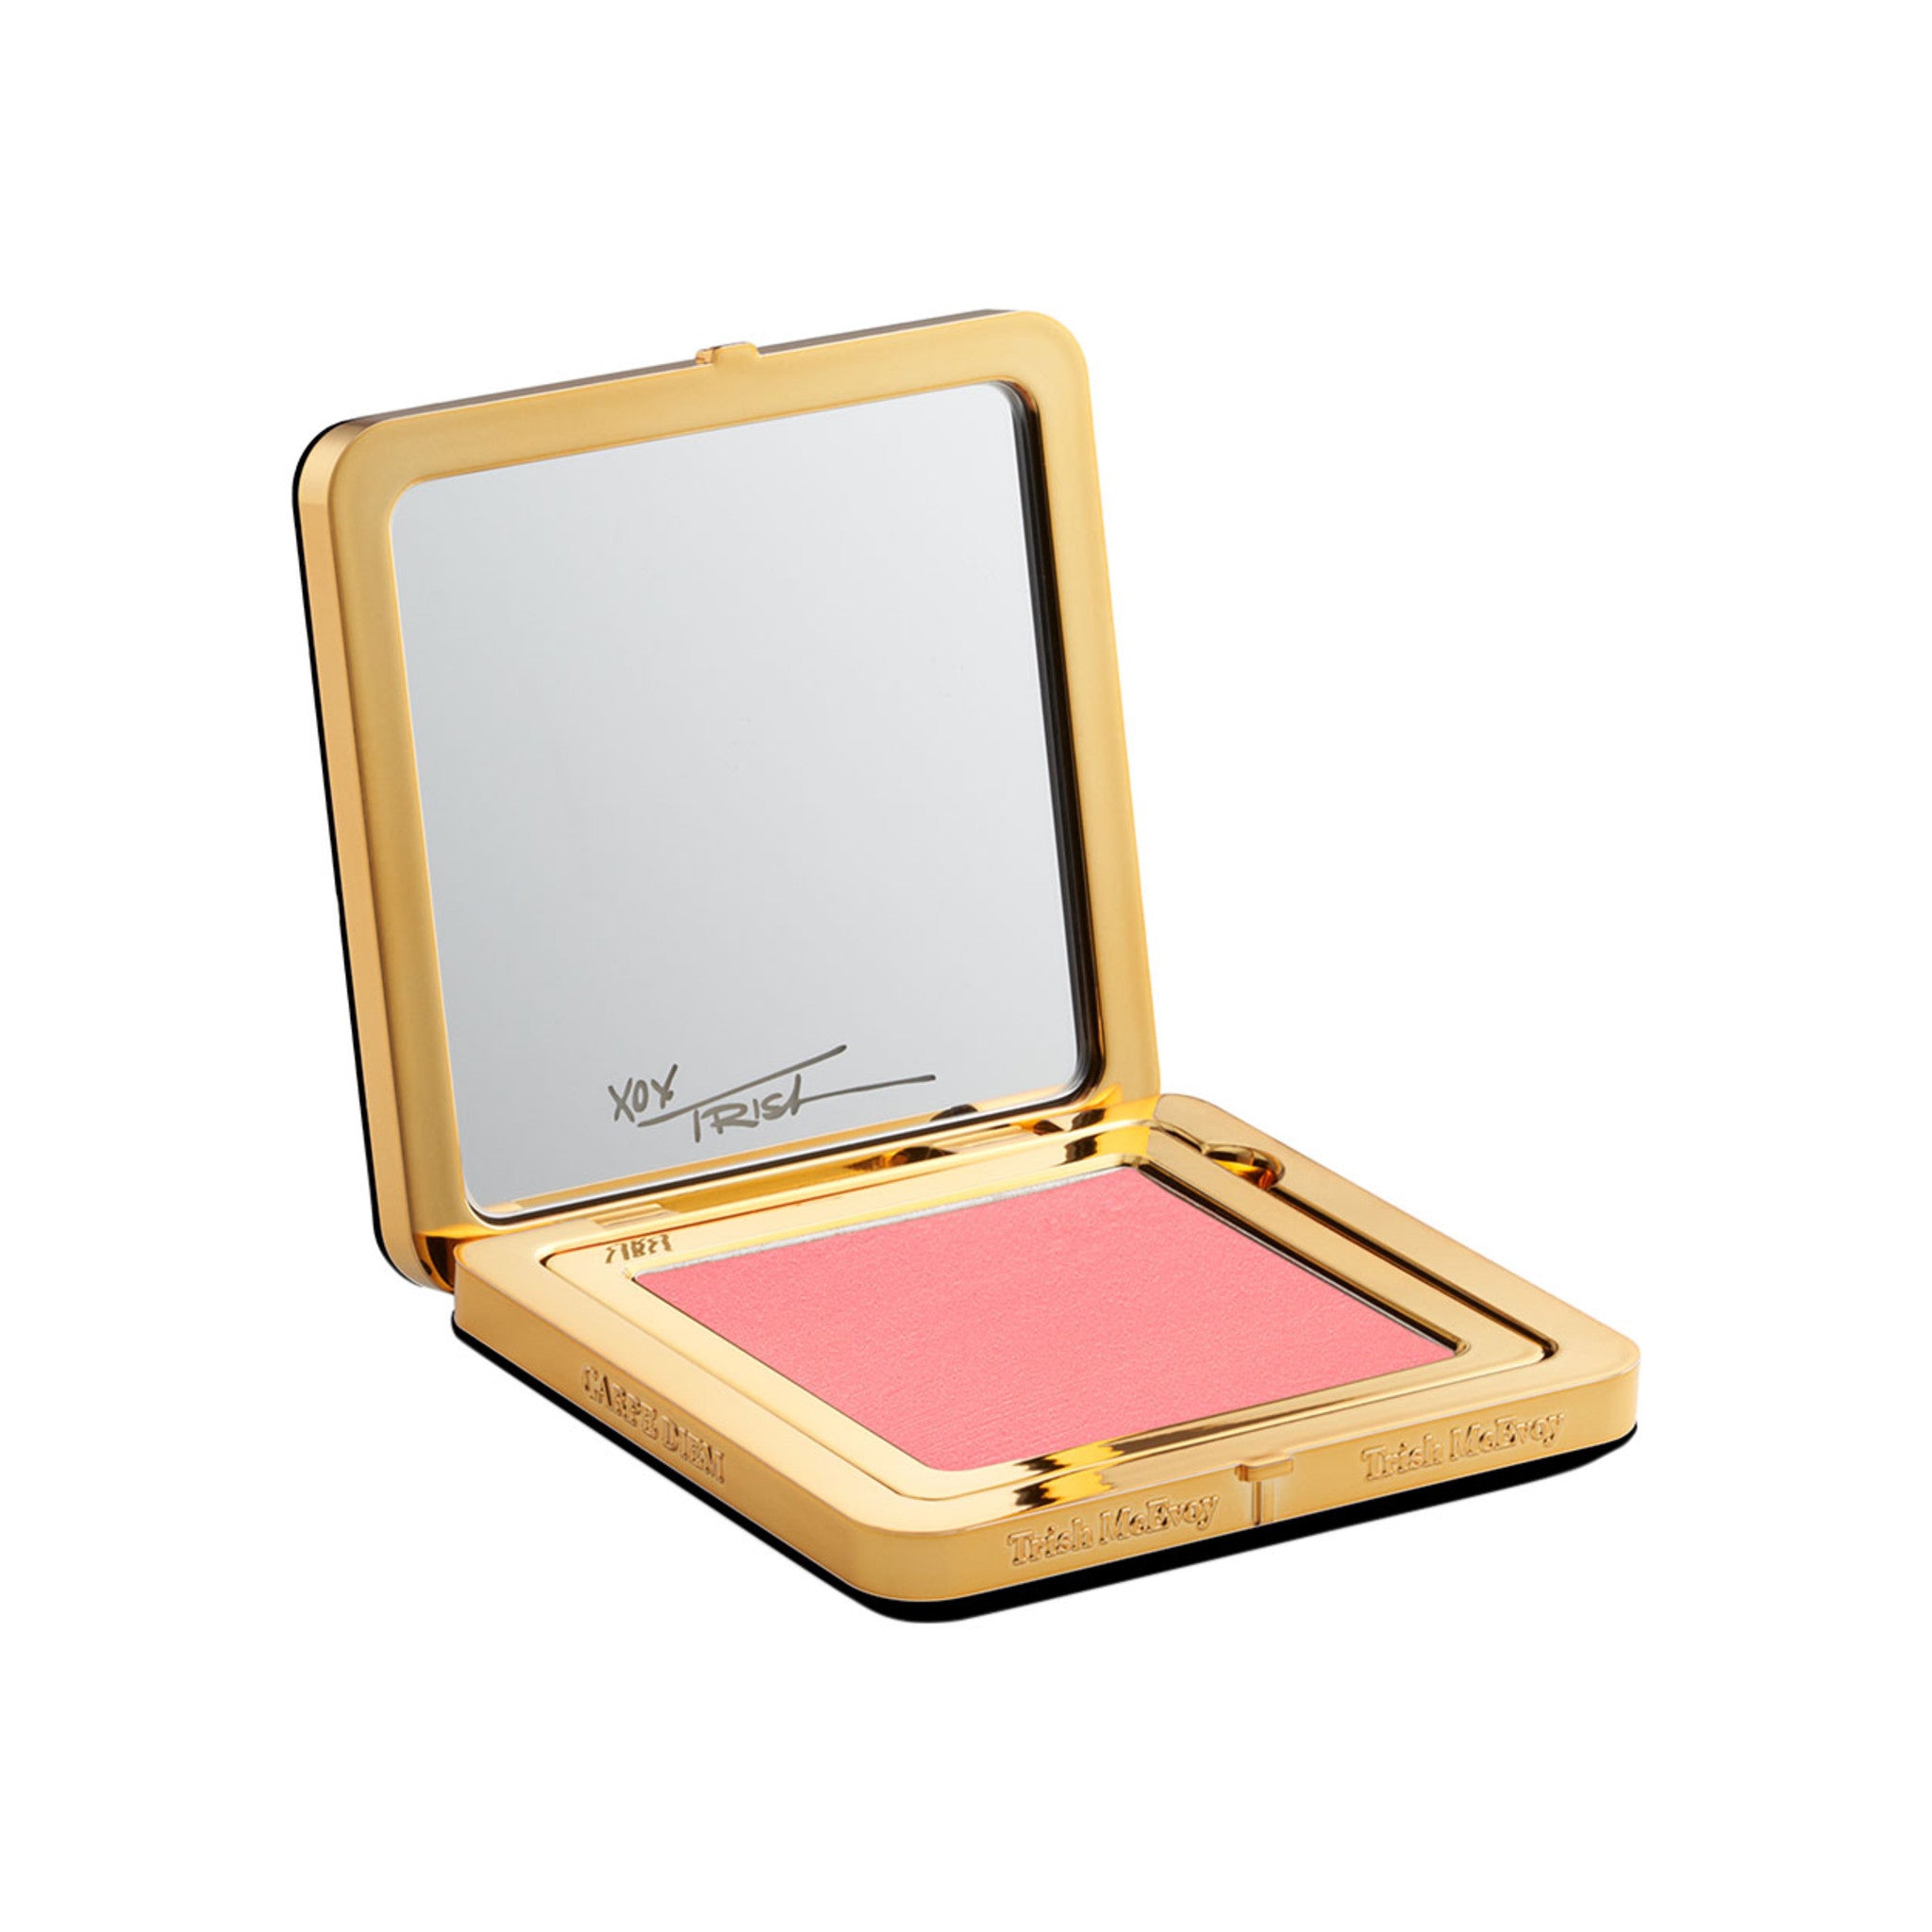 Trish McEvoy Gorgeous Cream Blush So Pretty main image. This product is in the color pink